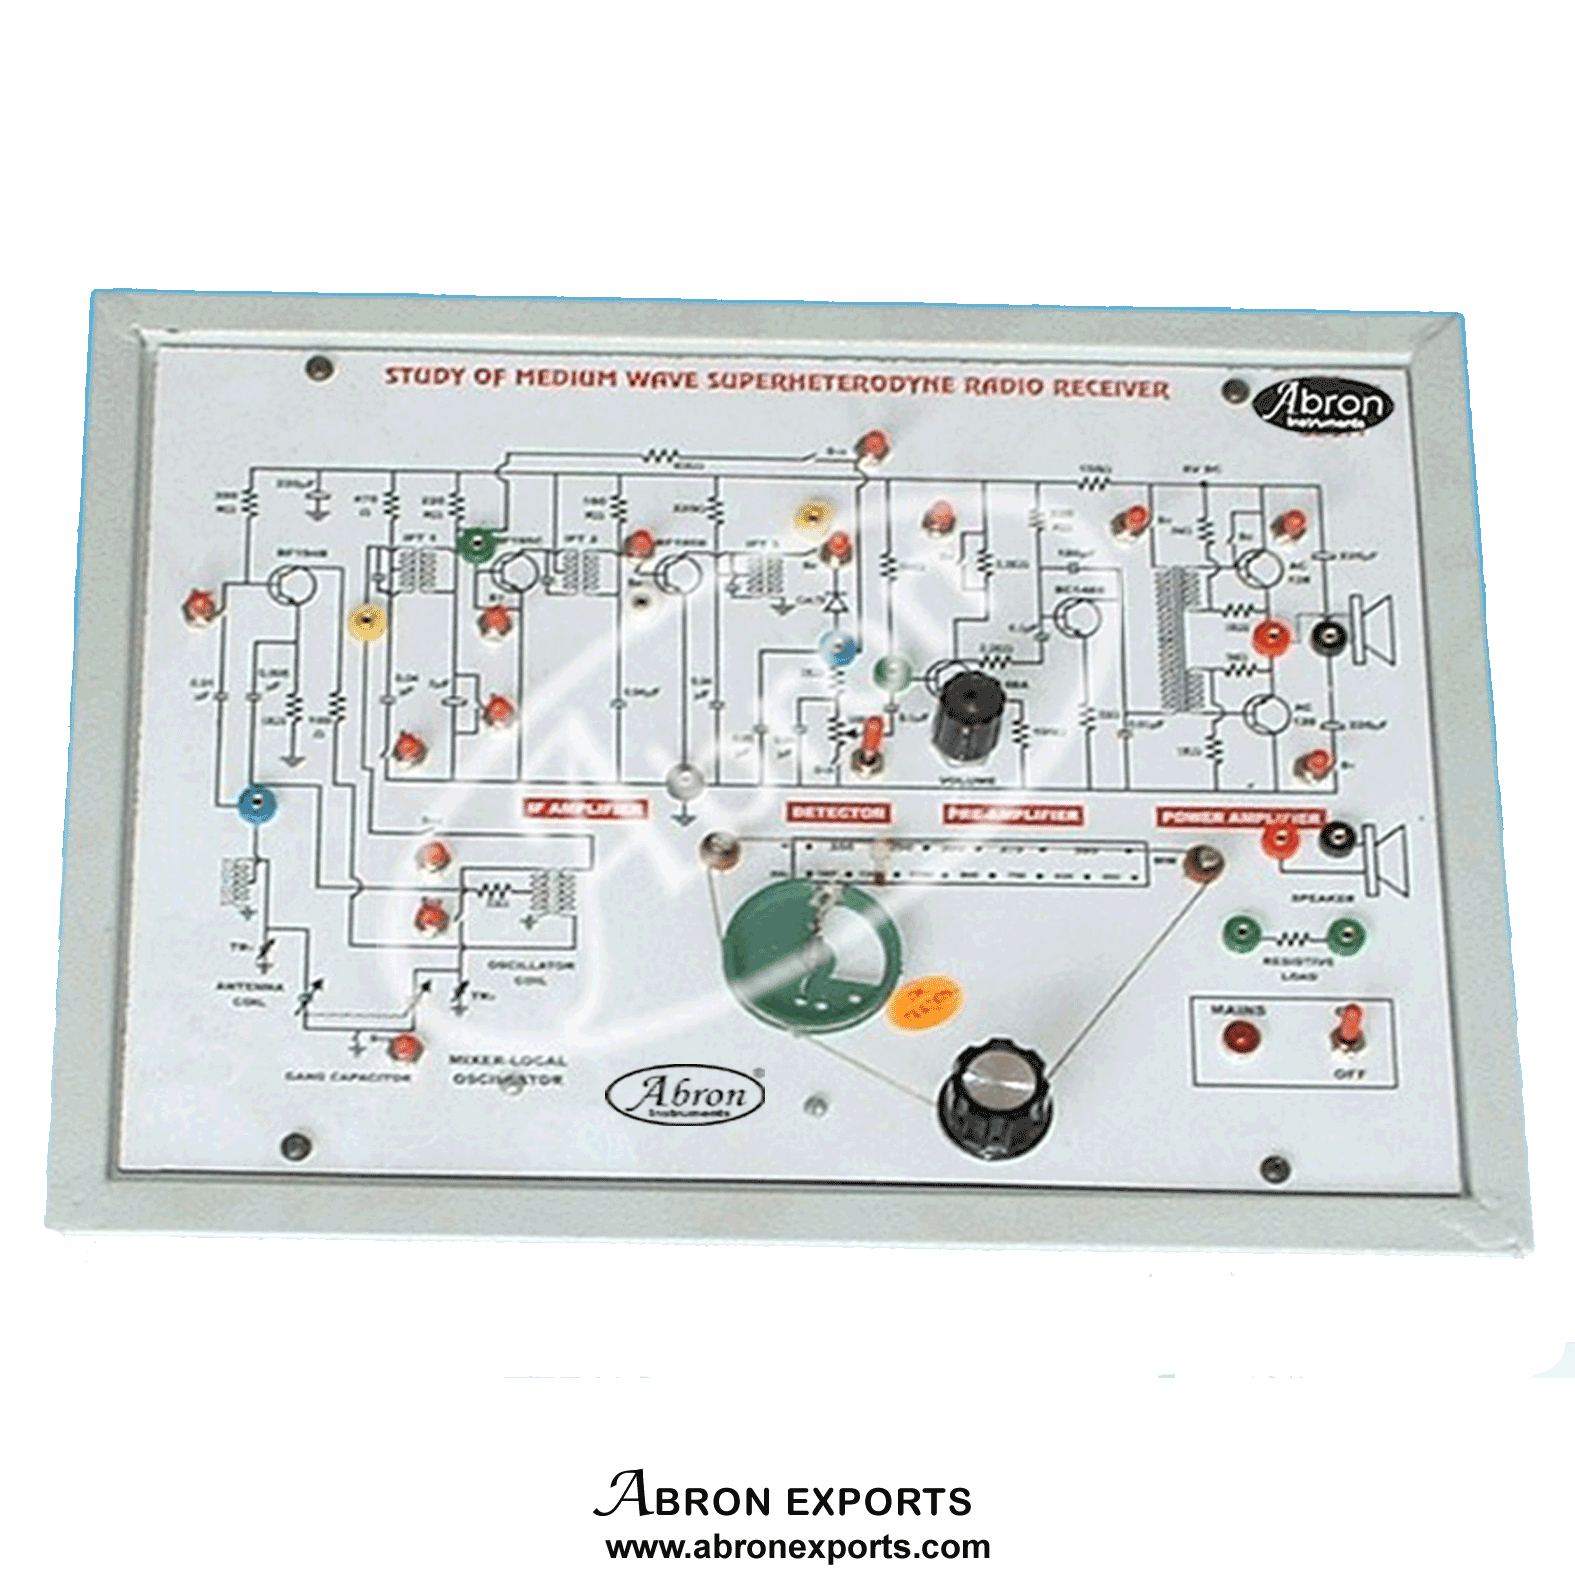 Demonstration Radio Receiver Super Heterodyne With Circuit Diagram Panel With Test Points Working 220v AE-1243H 